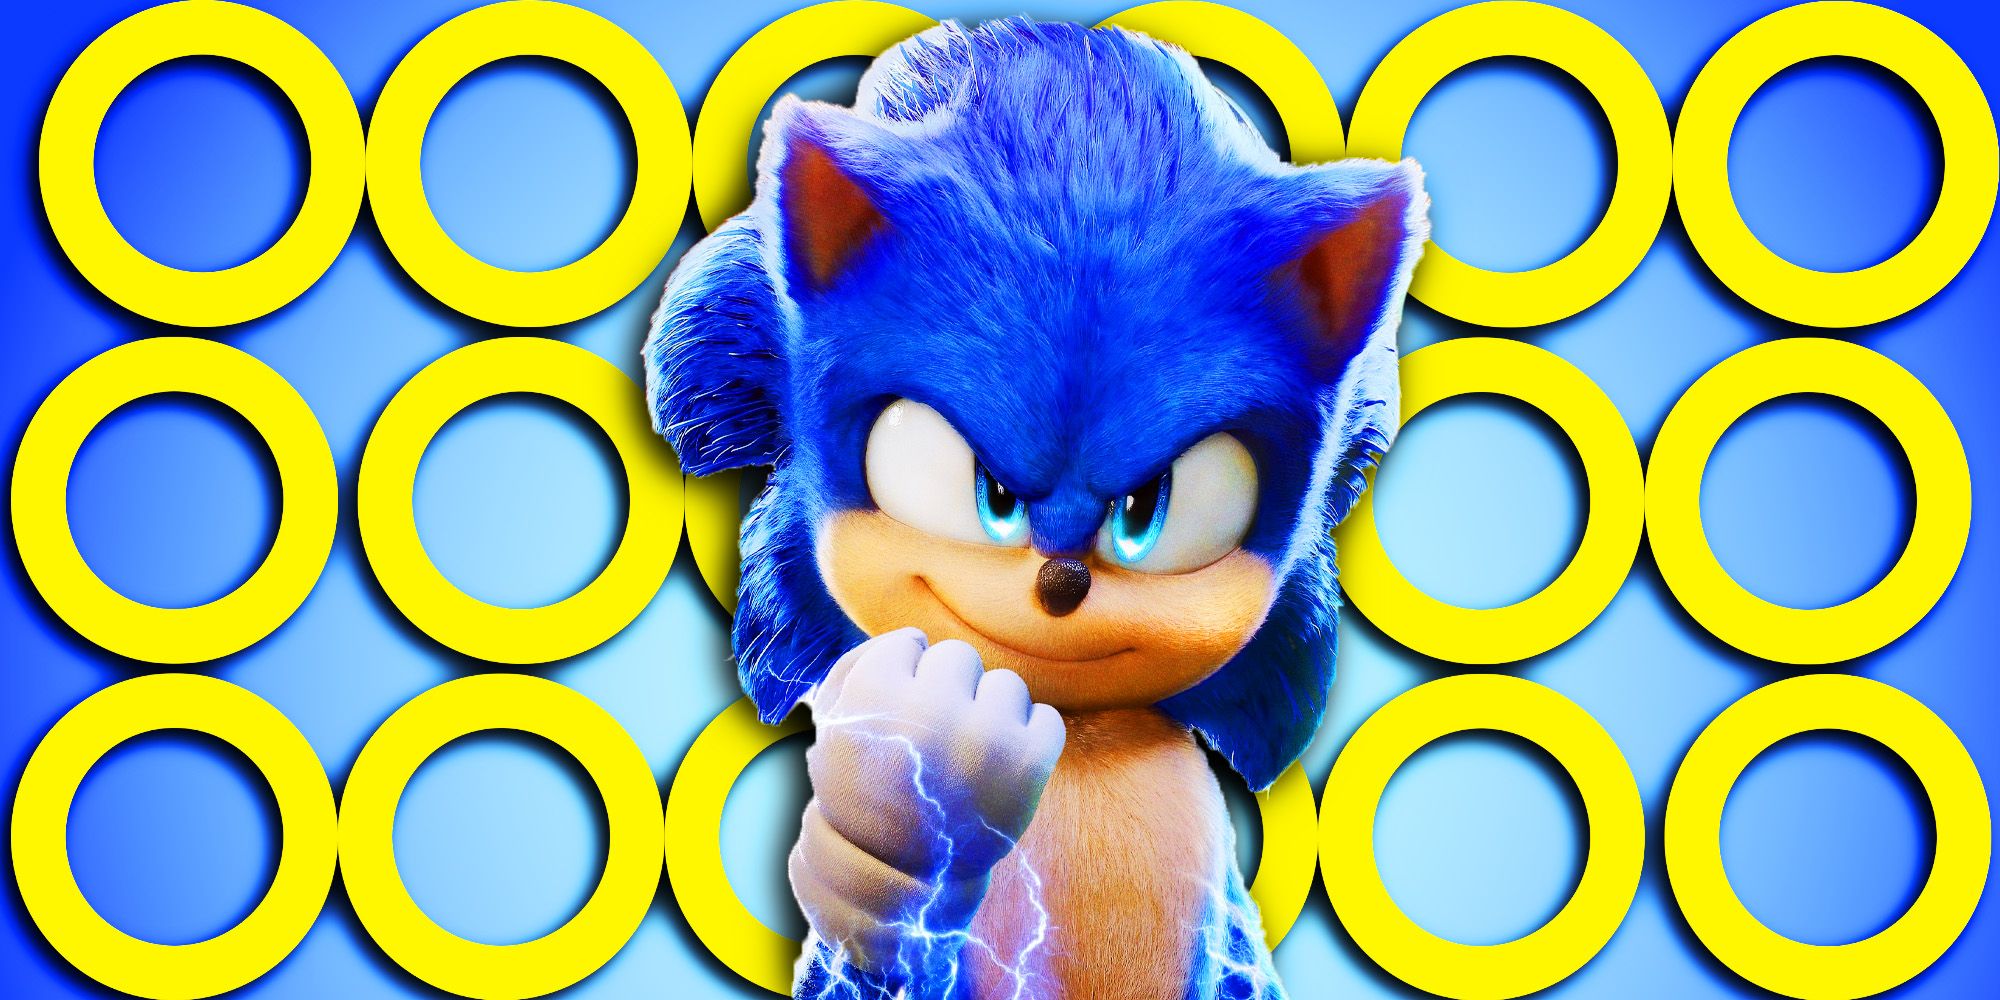 Sonic the Hedgehog smiling with energy coming from his hand with a golden rings backdrop